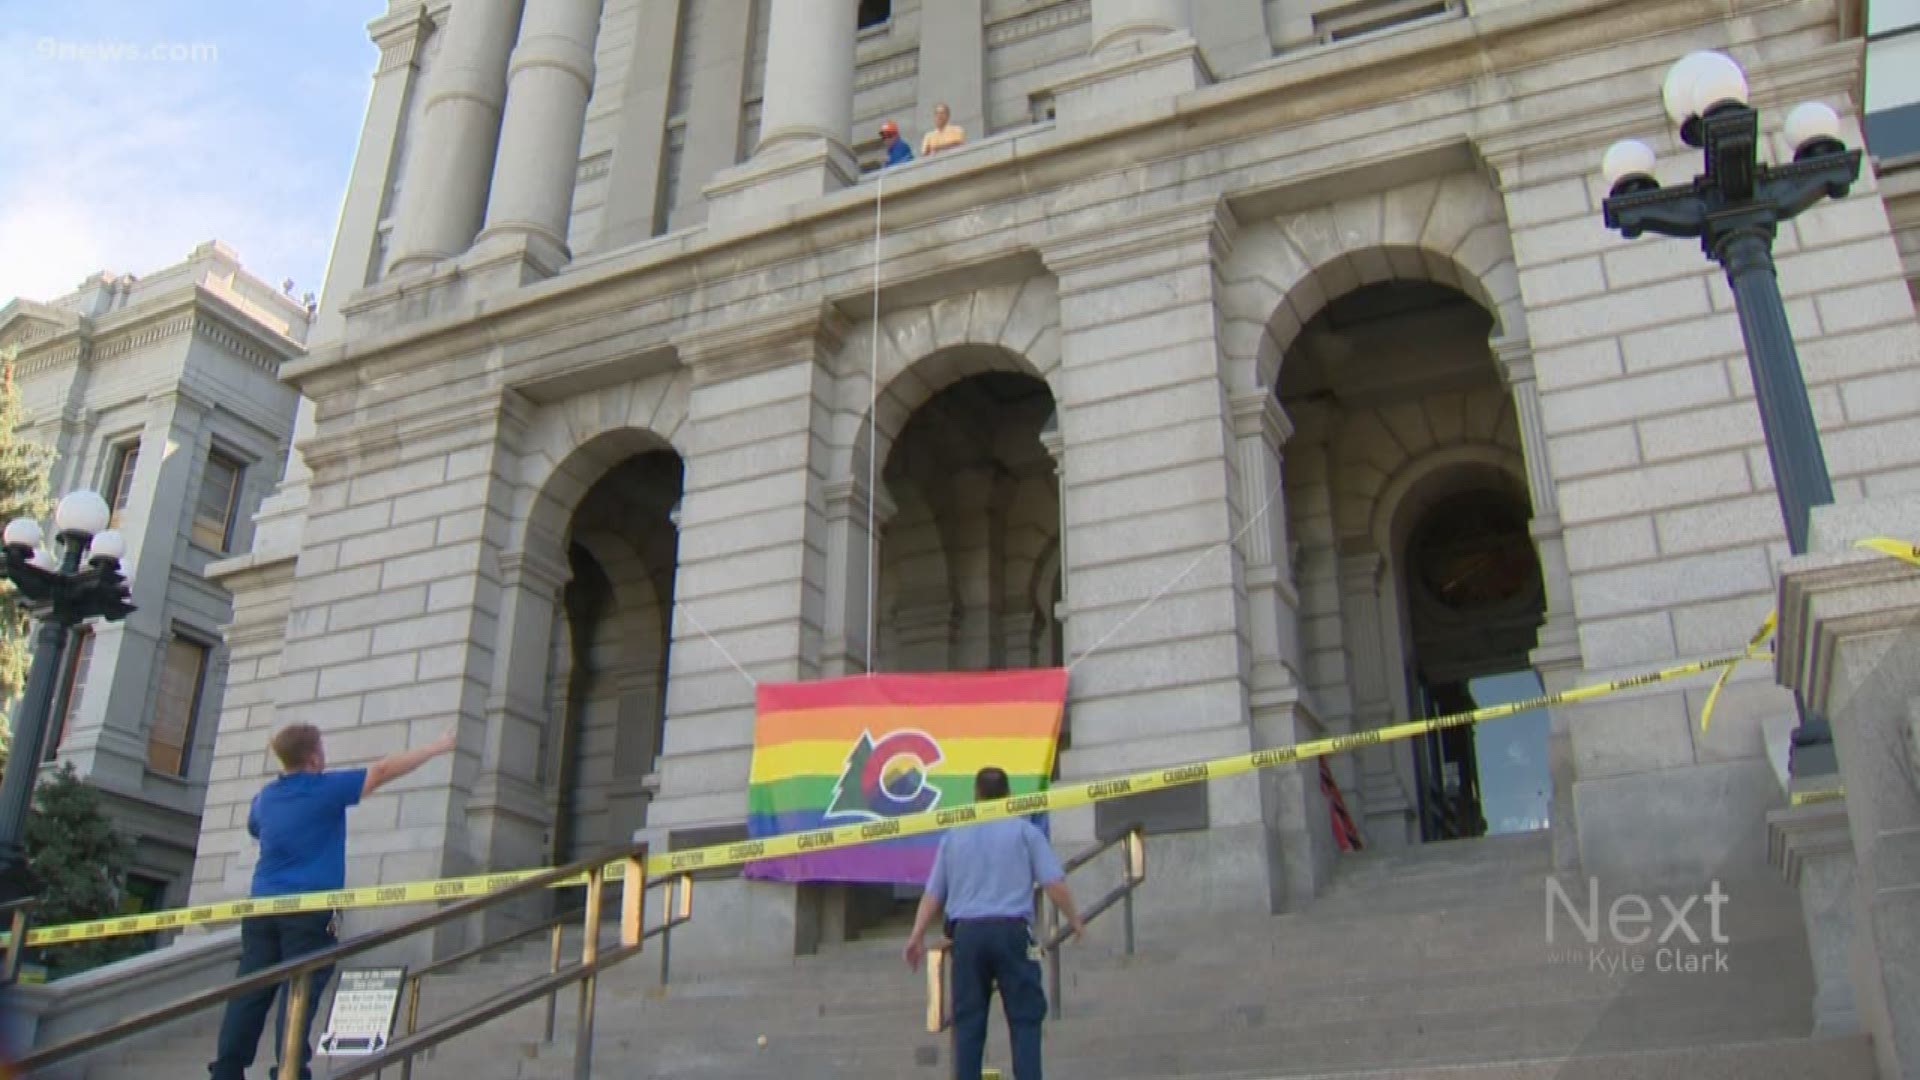 For the first time, a Pride flag will be flown outside the Colorado Capitol – across the street from the park where thousands of people will celebrate the LGBTQ community this weekend.